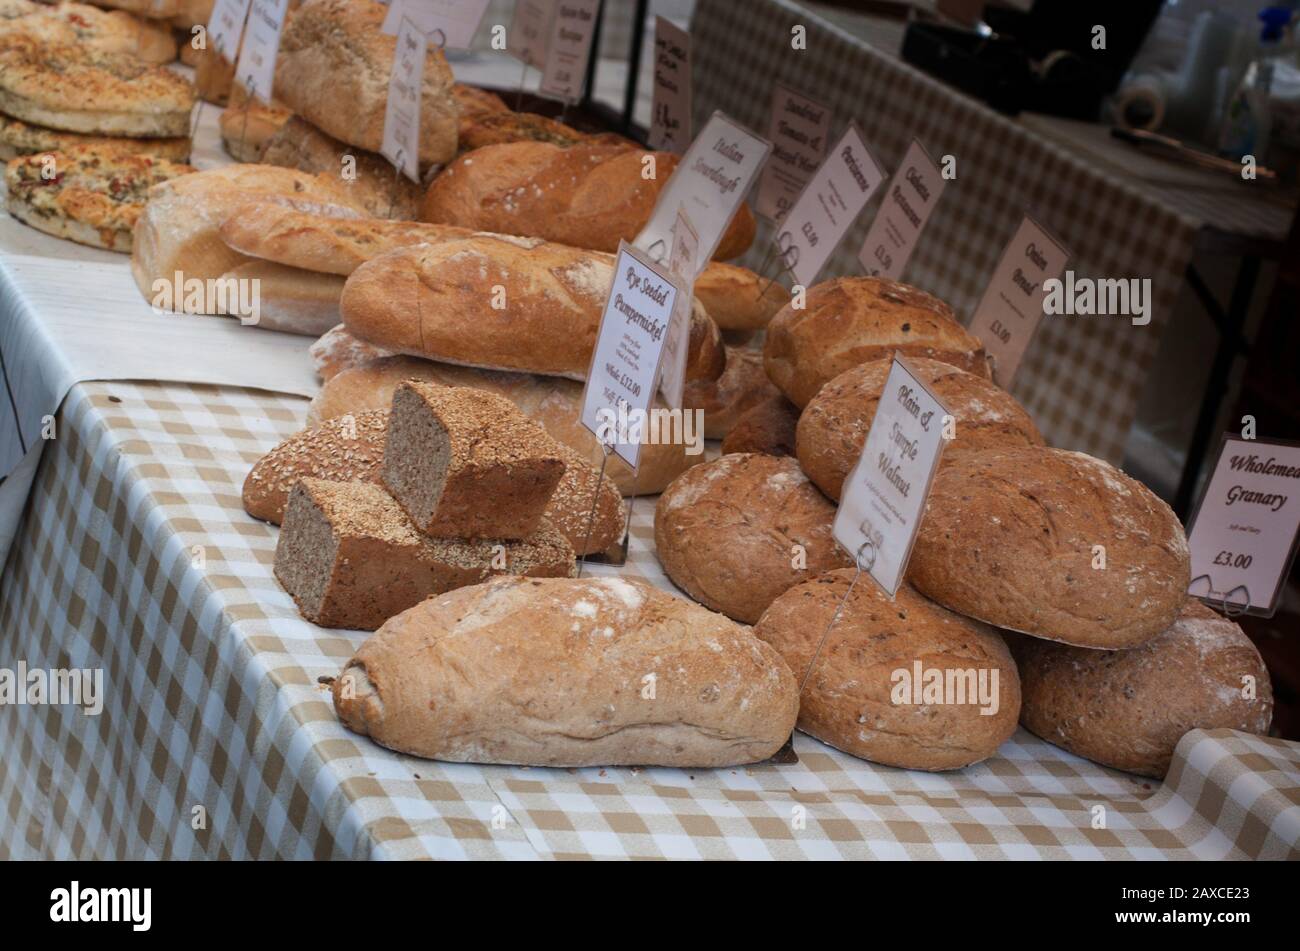 Loaves of bread at a market stall in Winchester, UK Stock Photo